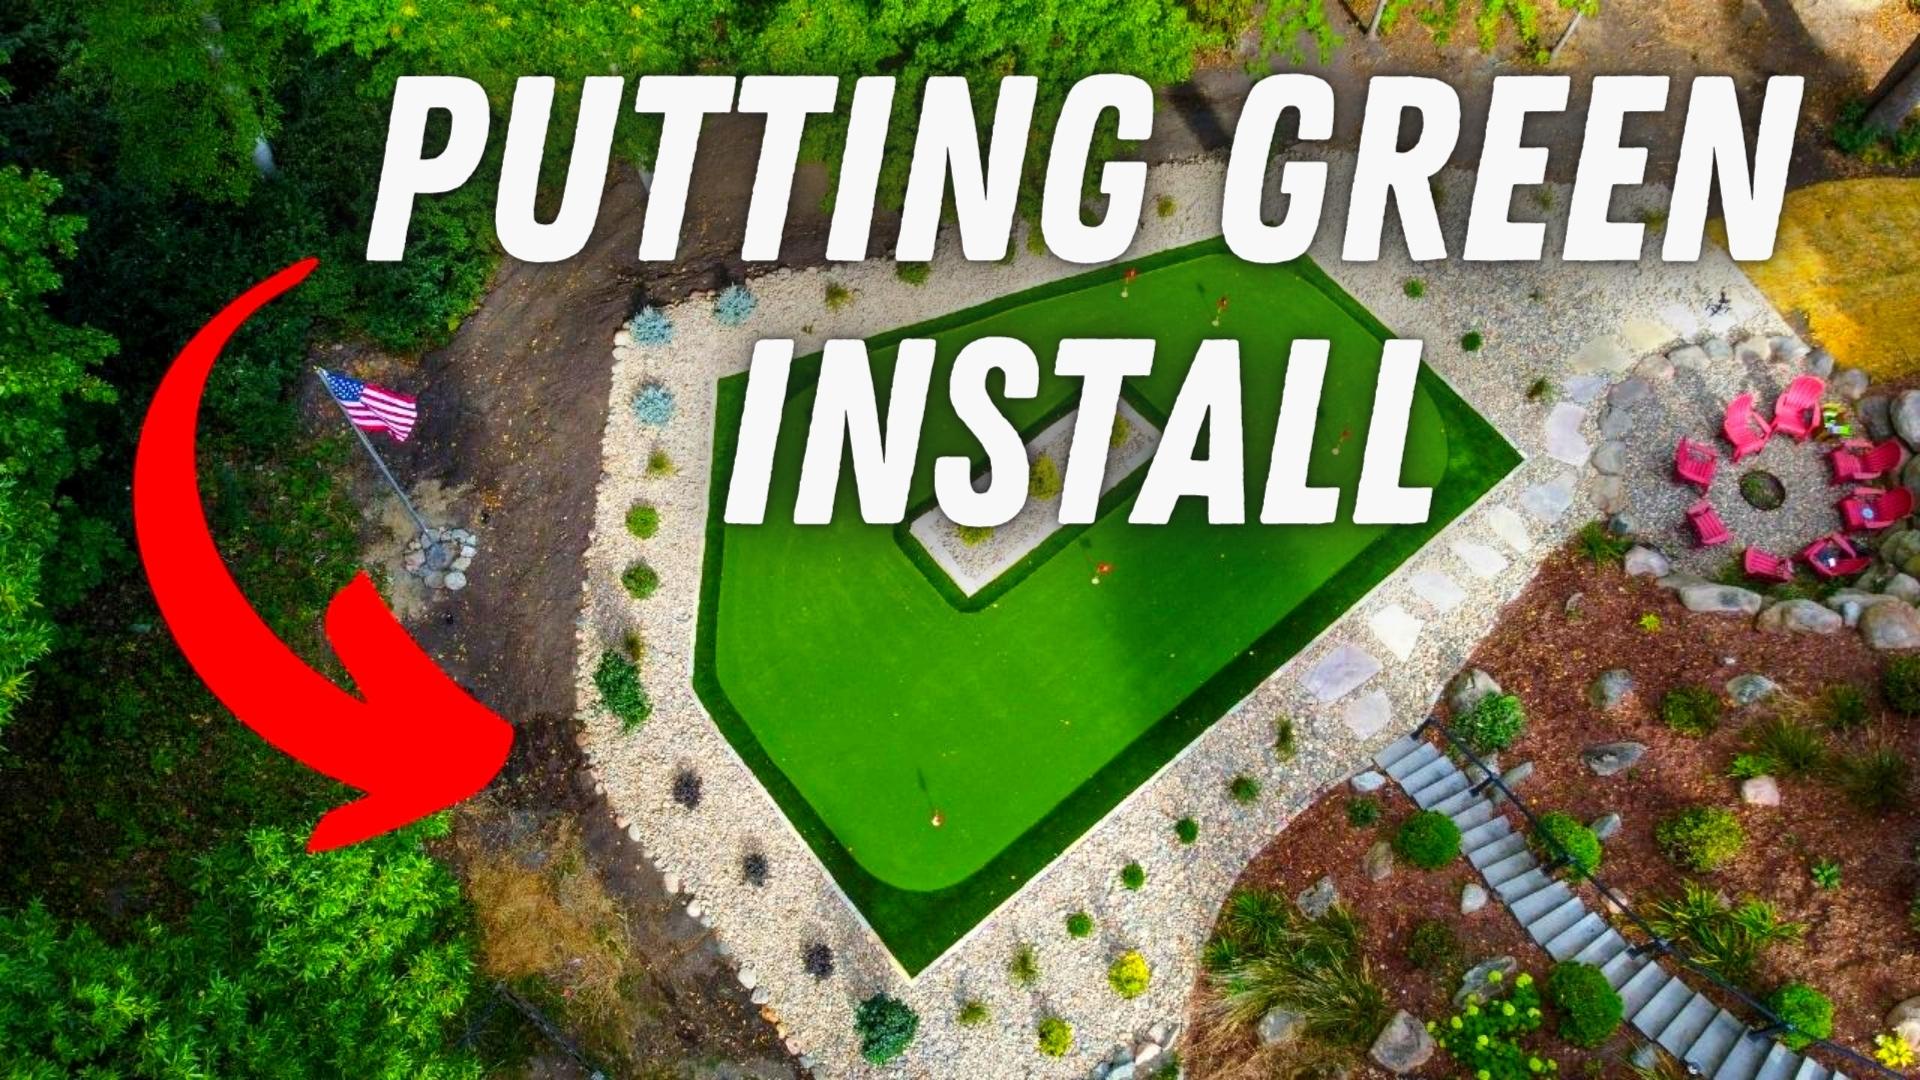 How to Install an Artificial Turf Putting Green: The Ultimate Guide